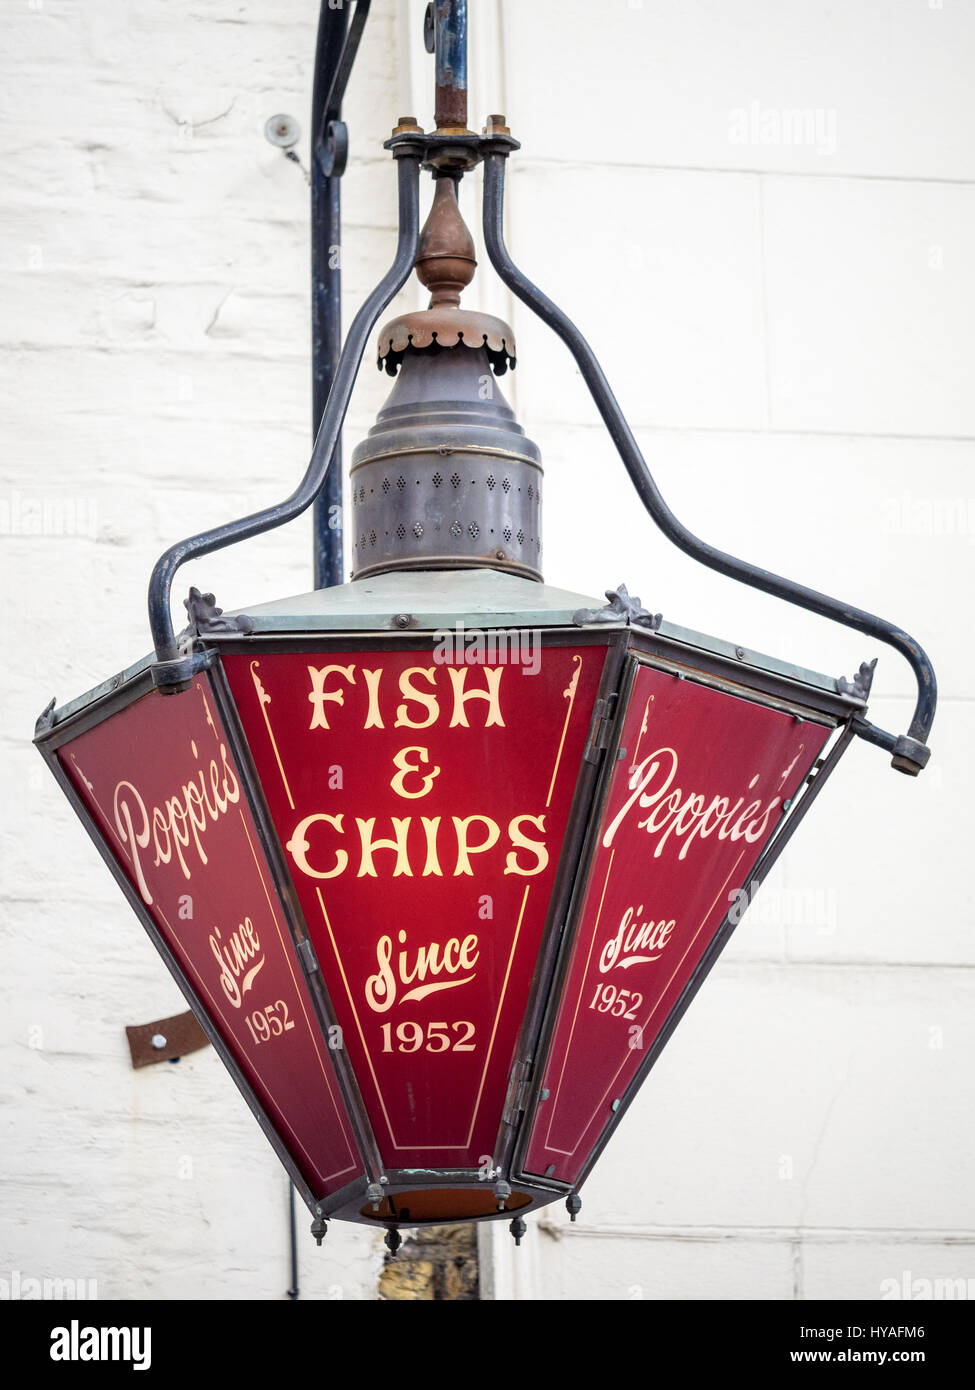 Fish & Chip Shop Sign - Old fashioned hanging sign outside Poppies fish and chips shop near Spitalfields Market in London's East End Stock Photo